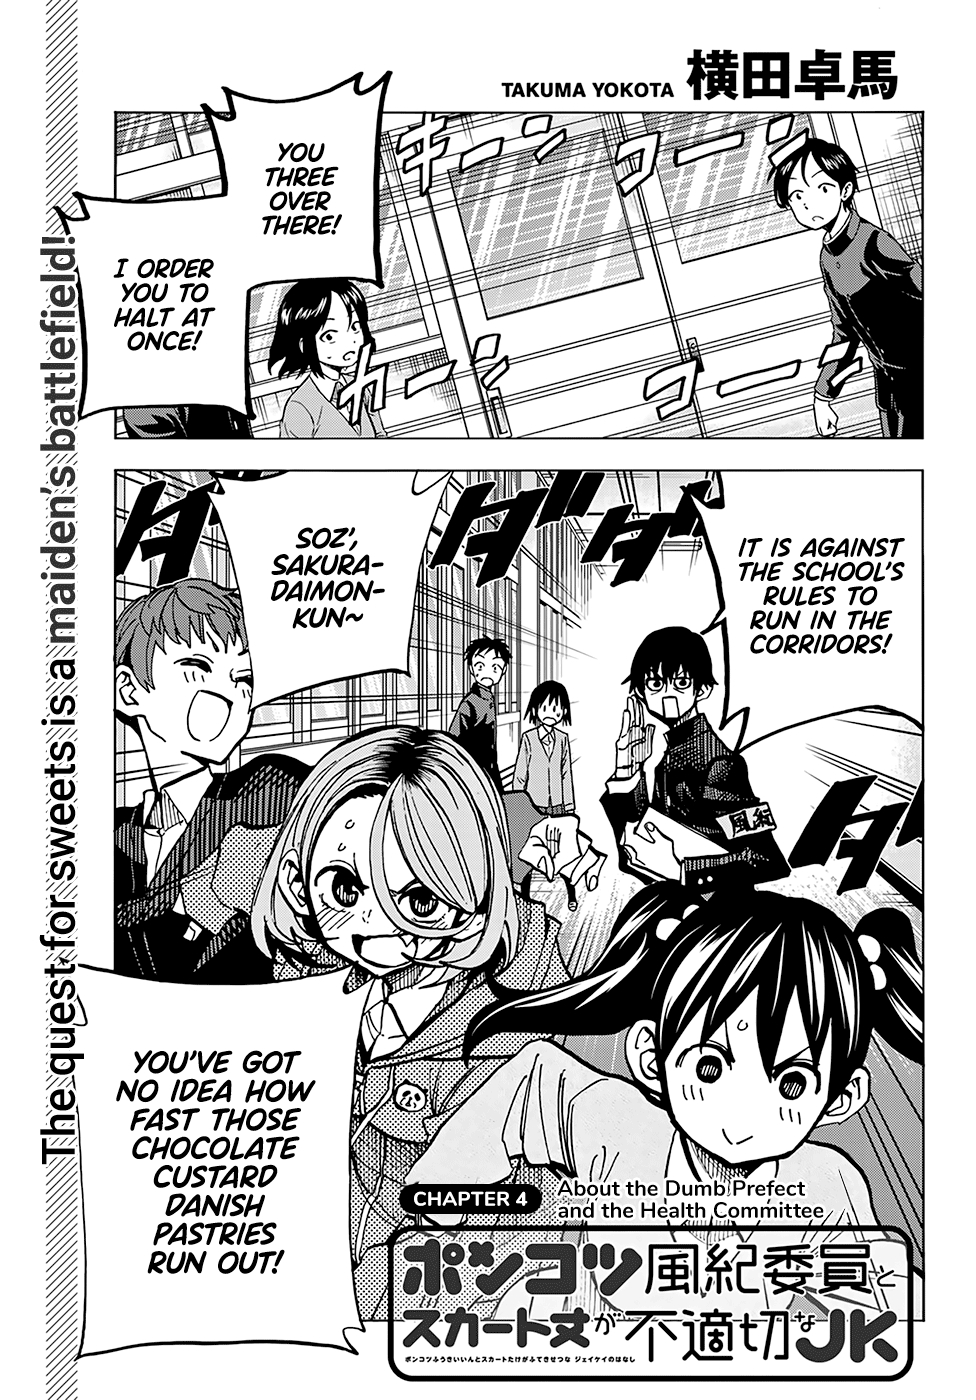 The Story Between a Dumb Prefect and a High School Girl with an Inappropriate Skirt Length Vol. 1 Ch. 4 About the Dumb Prefect and the Health Committee